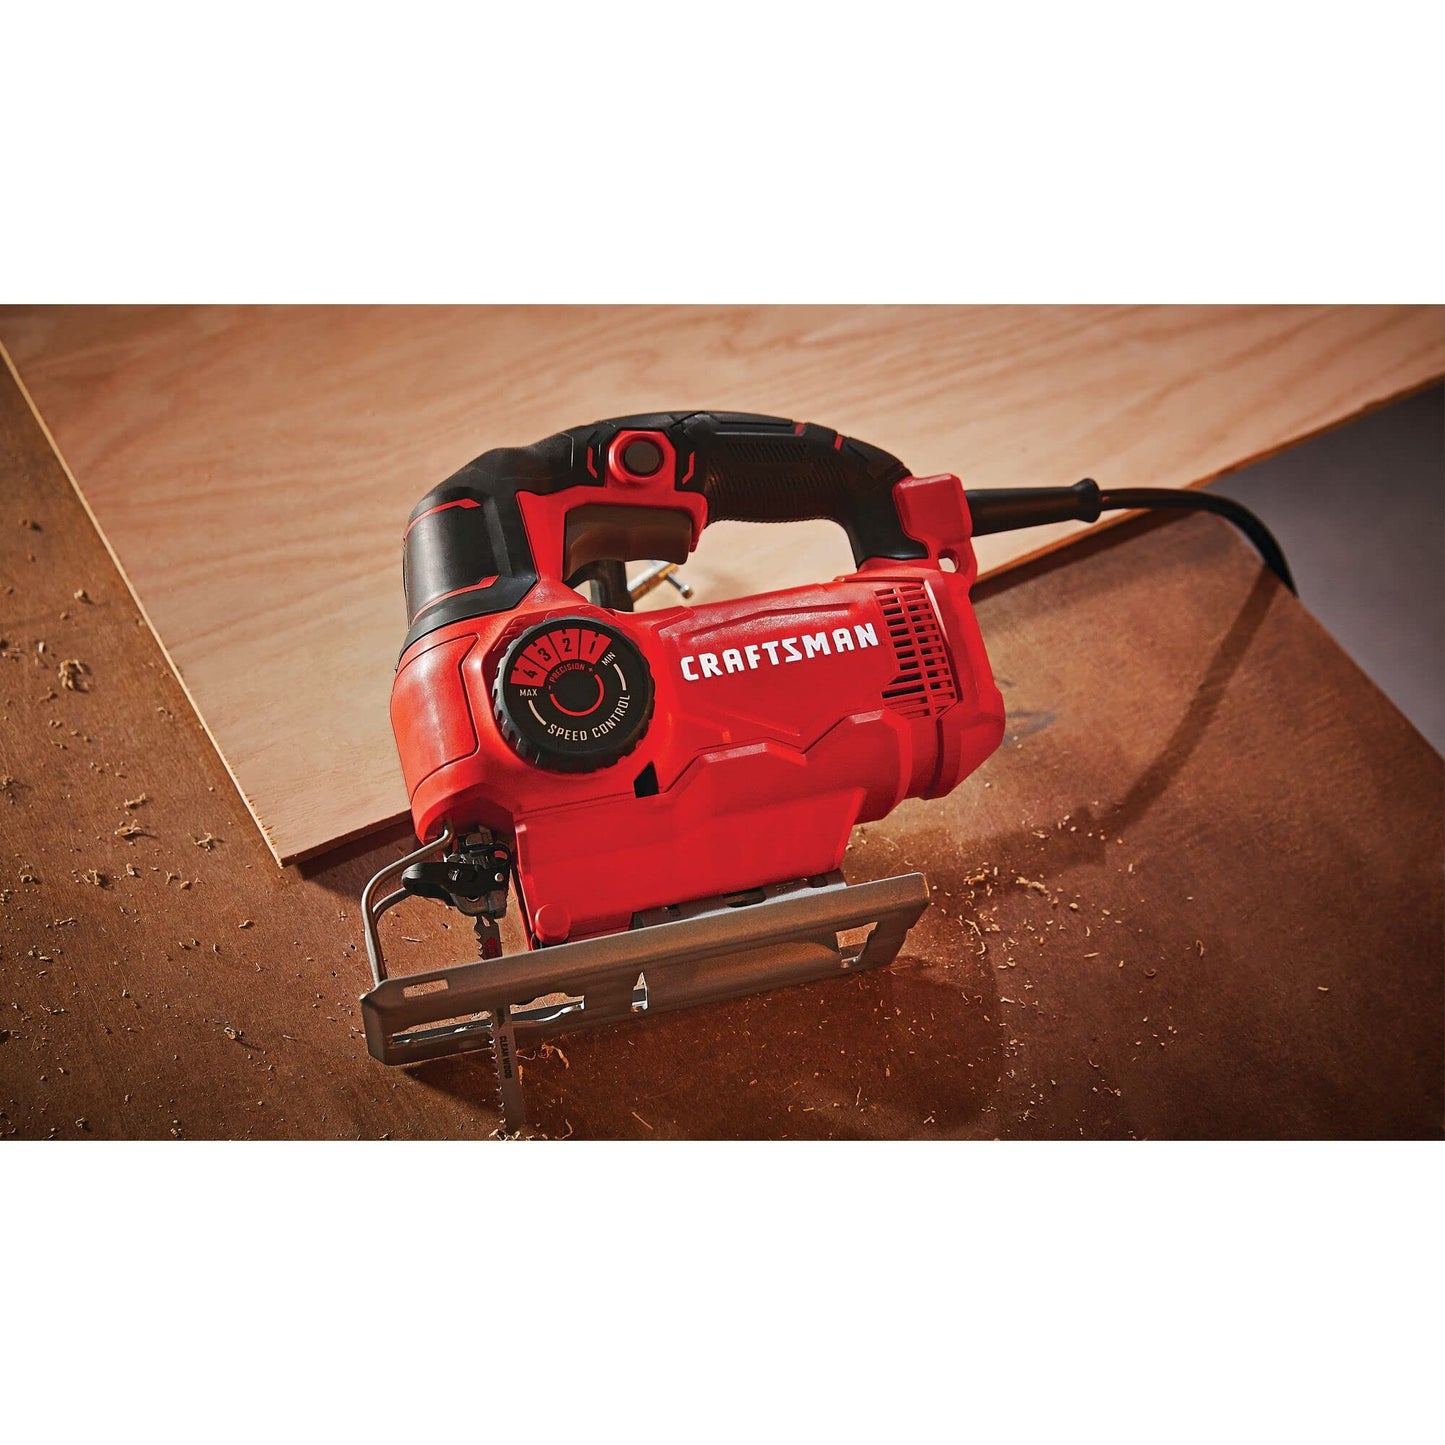 CRAFTSMAN Jig Saw, 4 Orbital Settings, Up to 3,000 SPM, 5 Amp, Corded (CMES610)